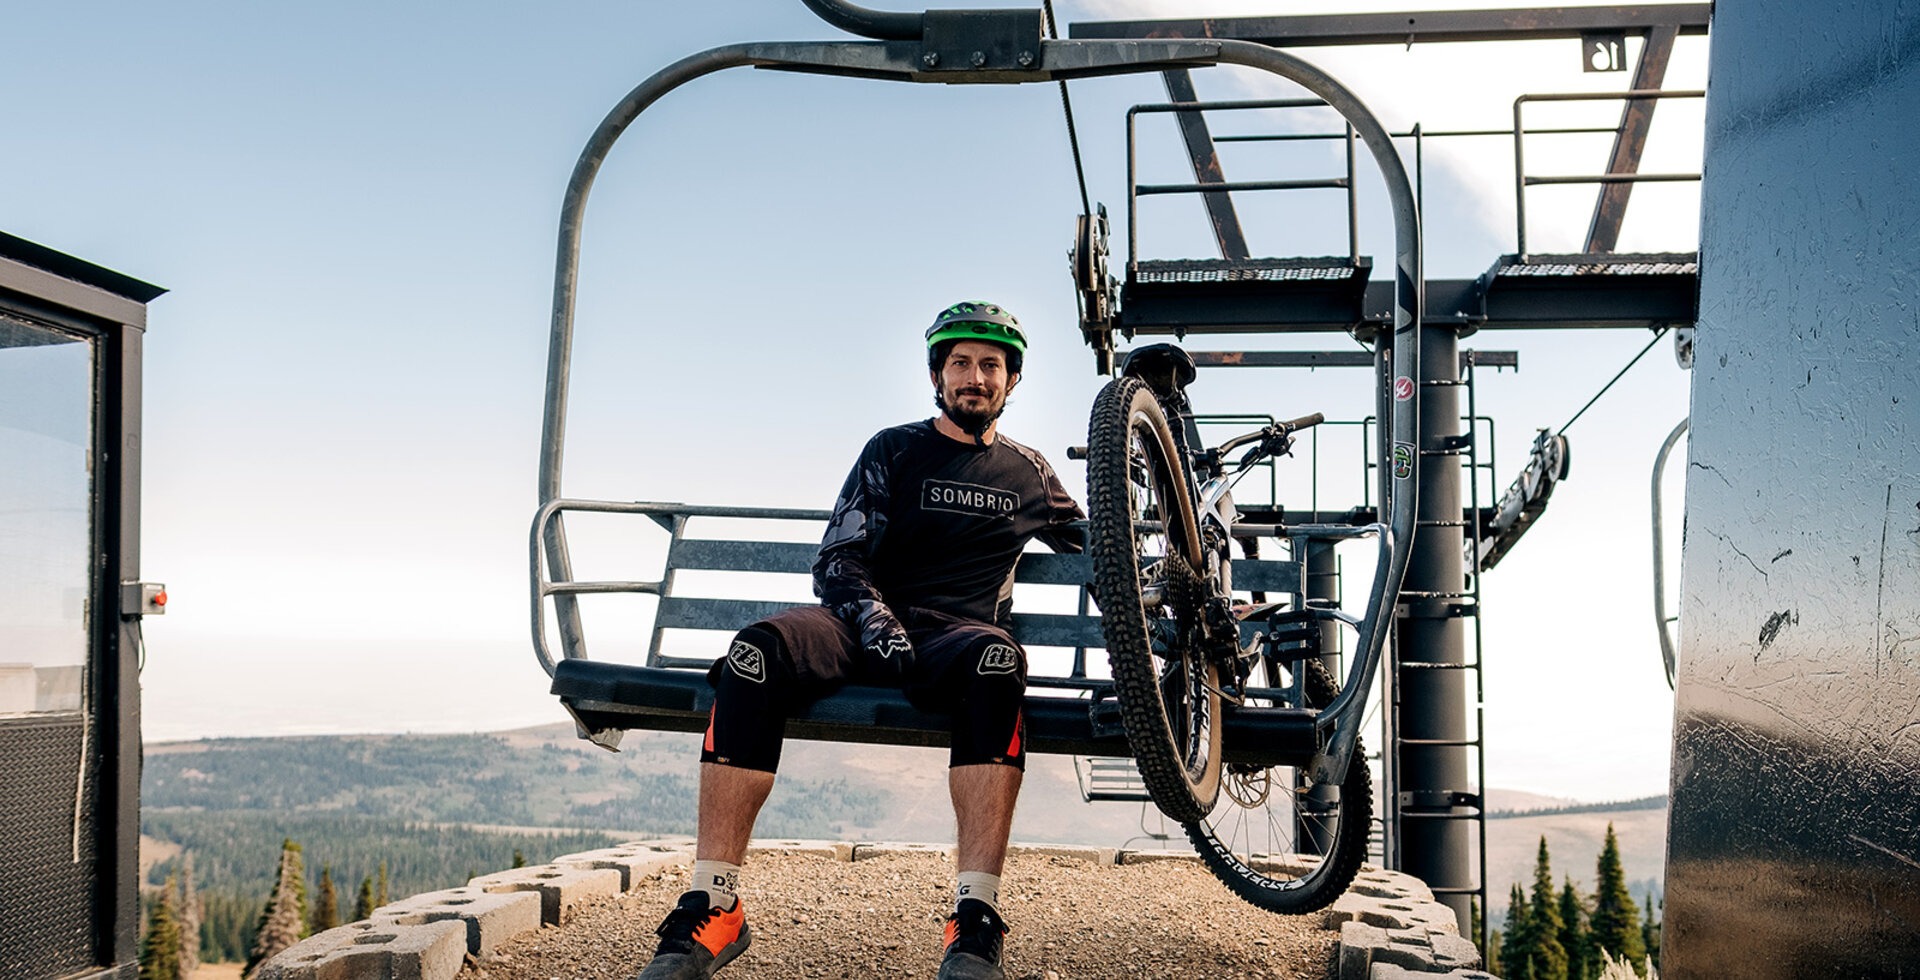 At Pomerelle, the bike park’s chairlift runs on demand, and while word on the trail is that some veterans can unload their bikes without stopping the chair, lead trail builder Michael Westfall takes the safe tack.